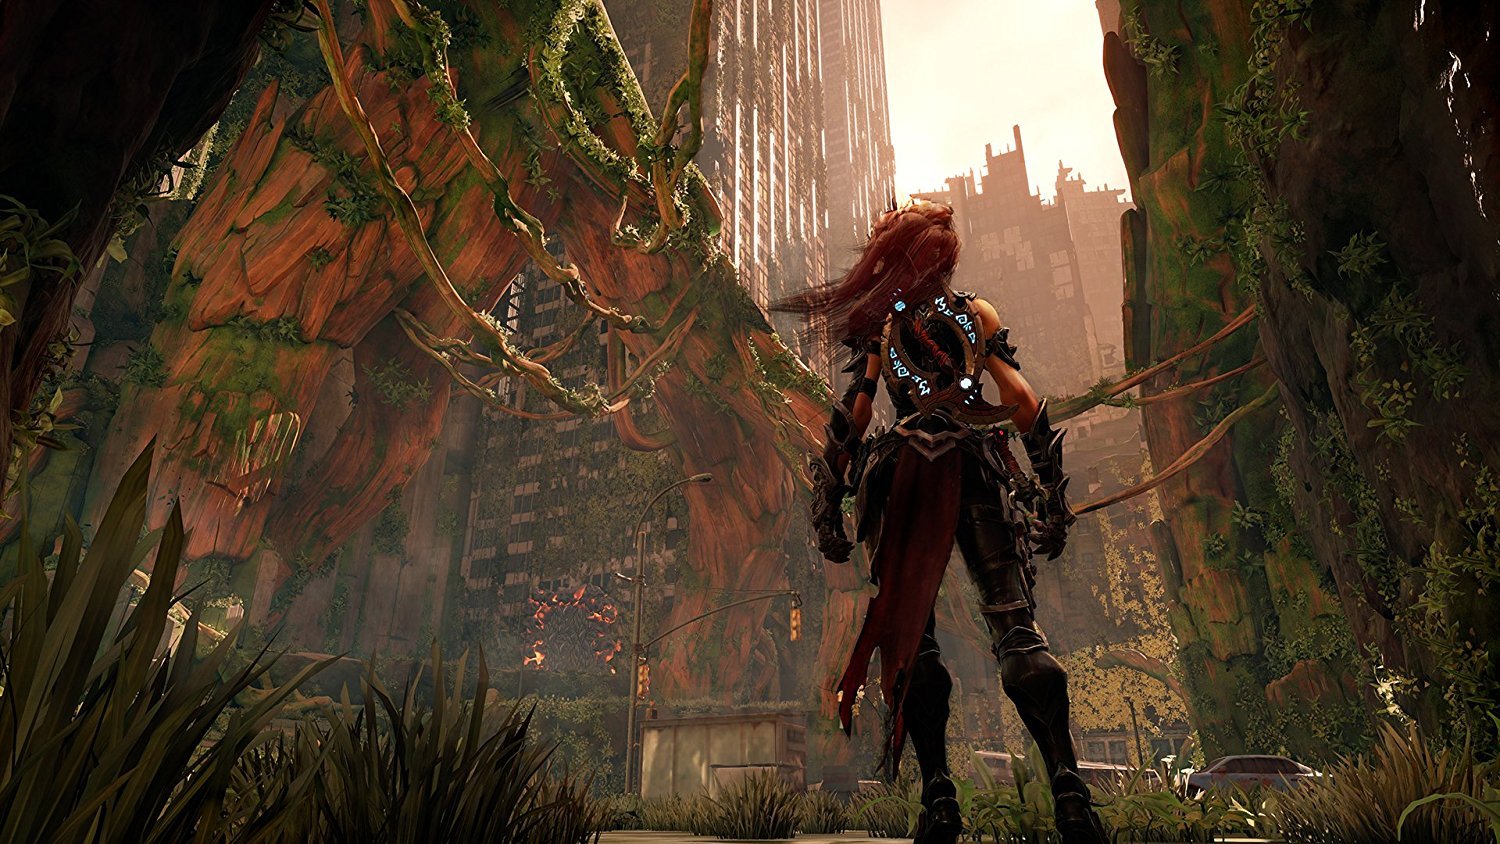 darksiders-3-leaked-with-screenshots-and-details-14937203424.jpg